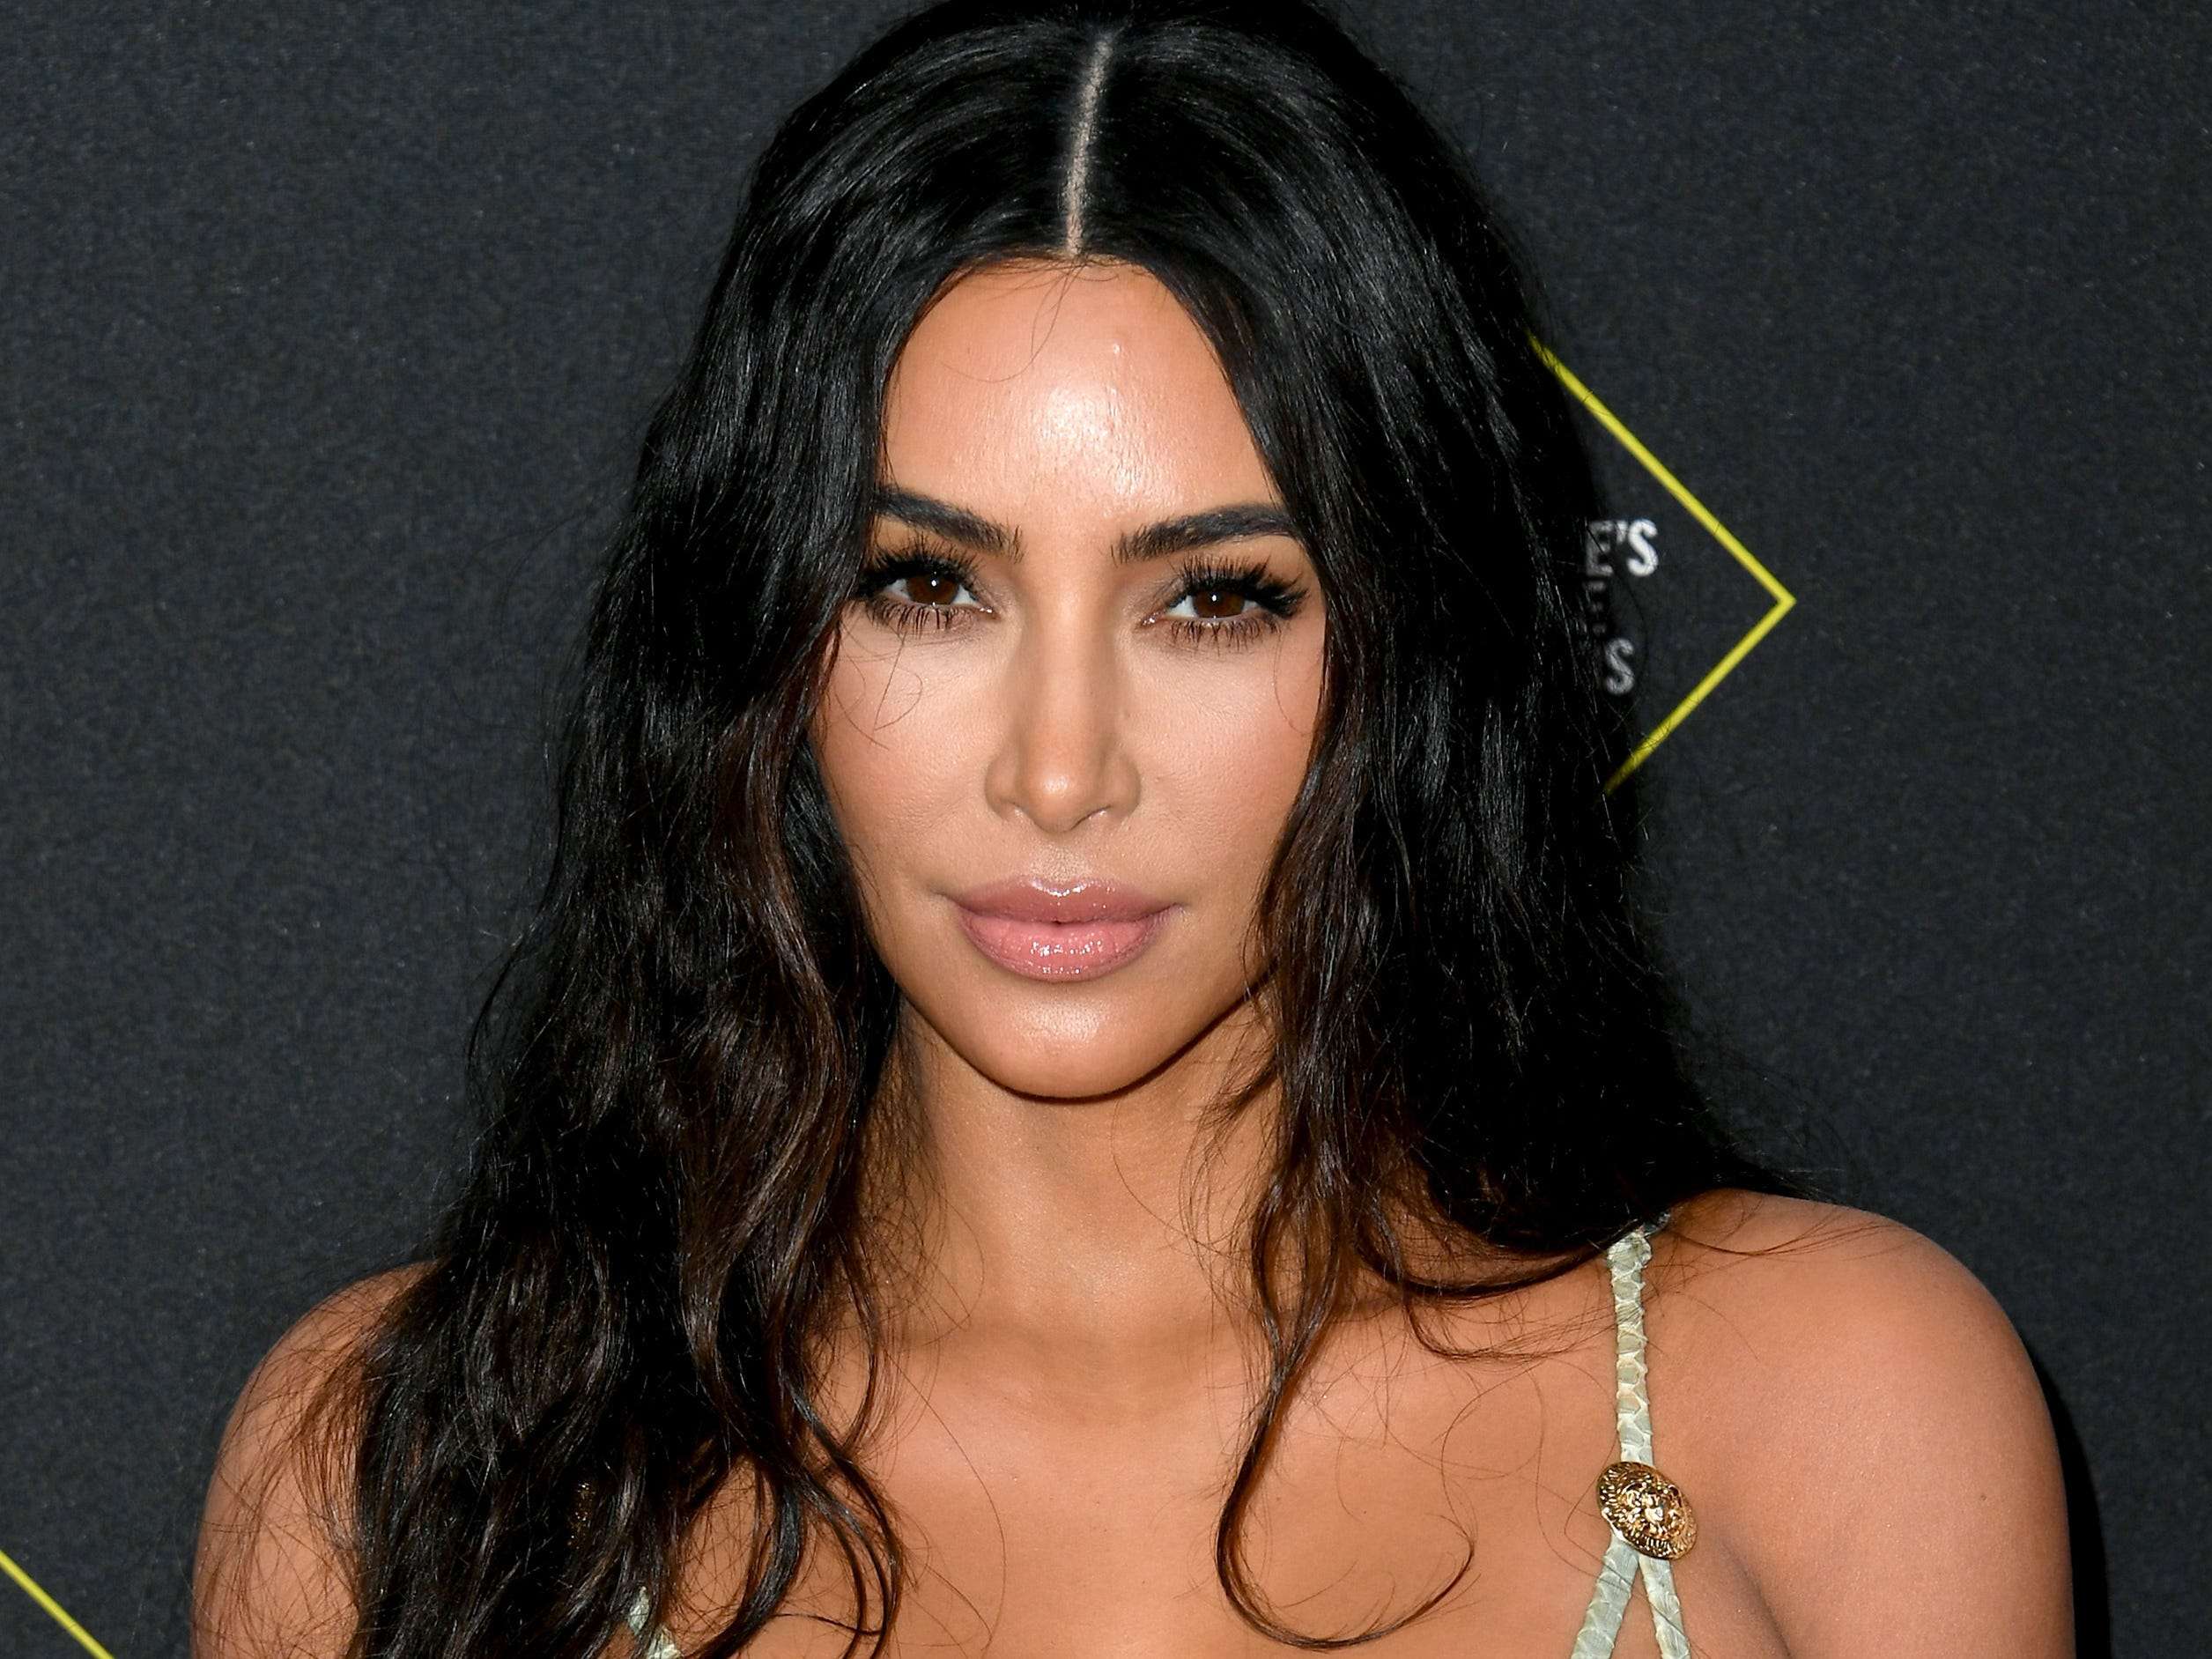 Fans say the same thing about Kim Kardashian's recent Instagram